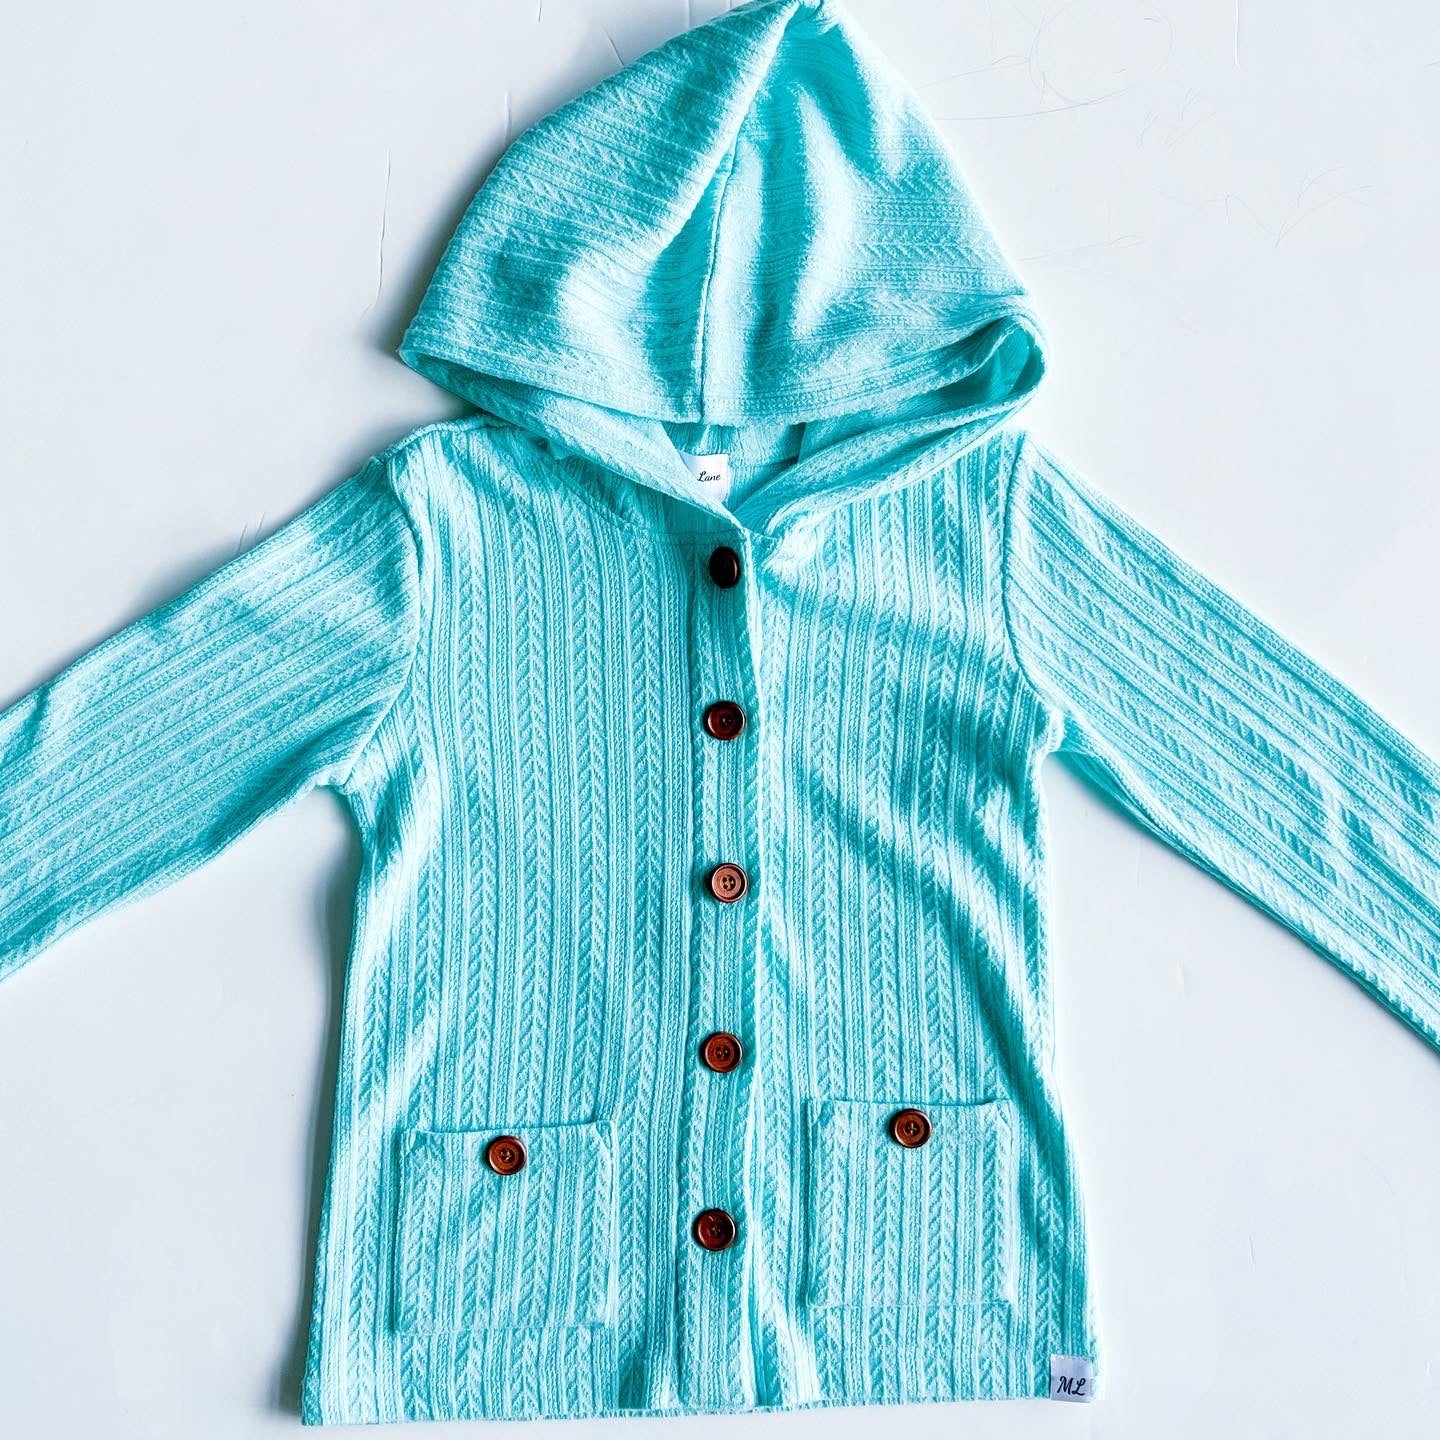 Women signature Cardigans (yellow and mint only)